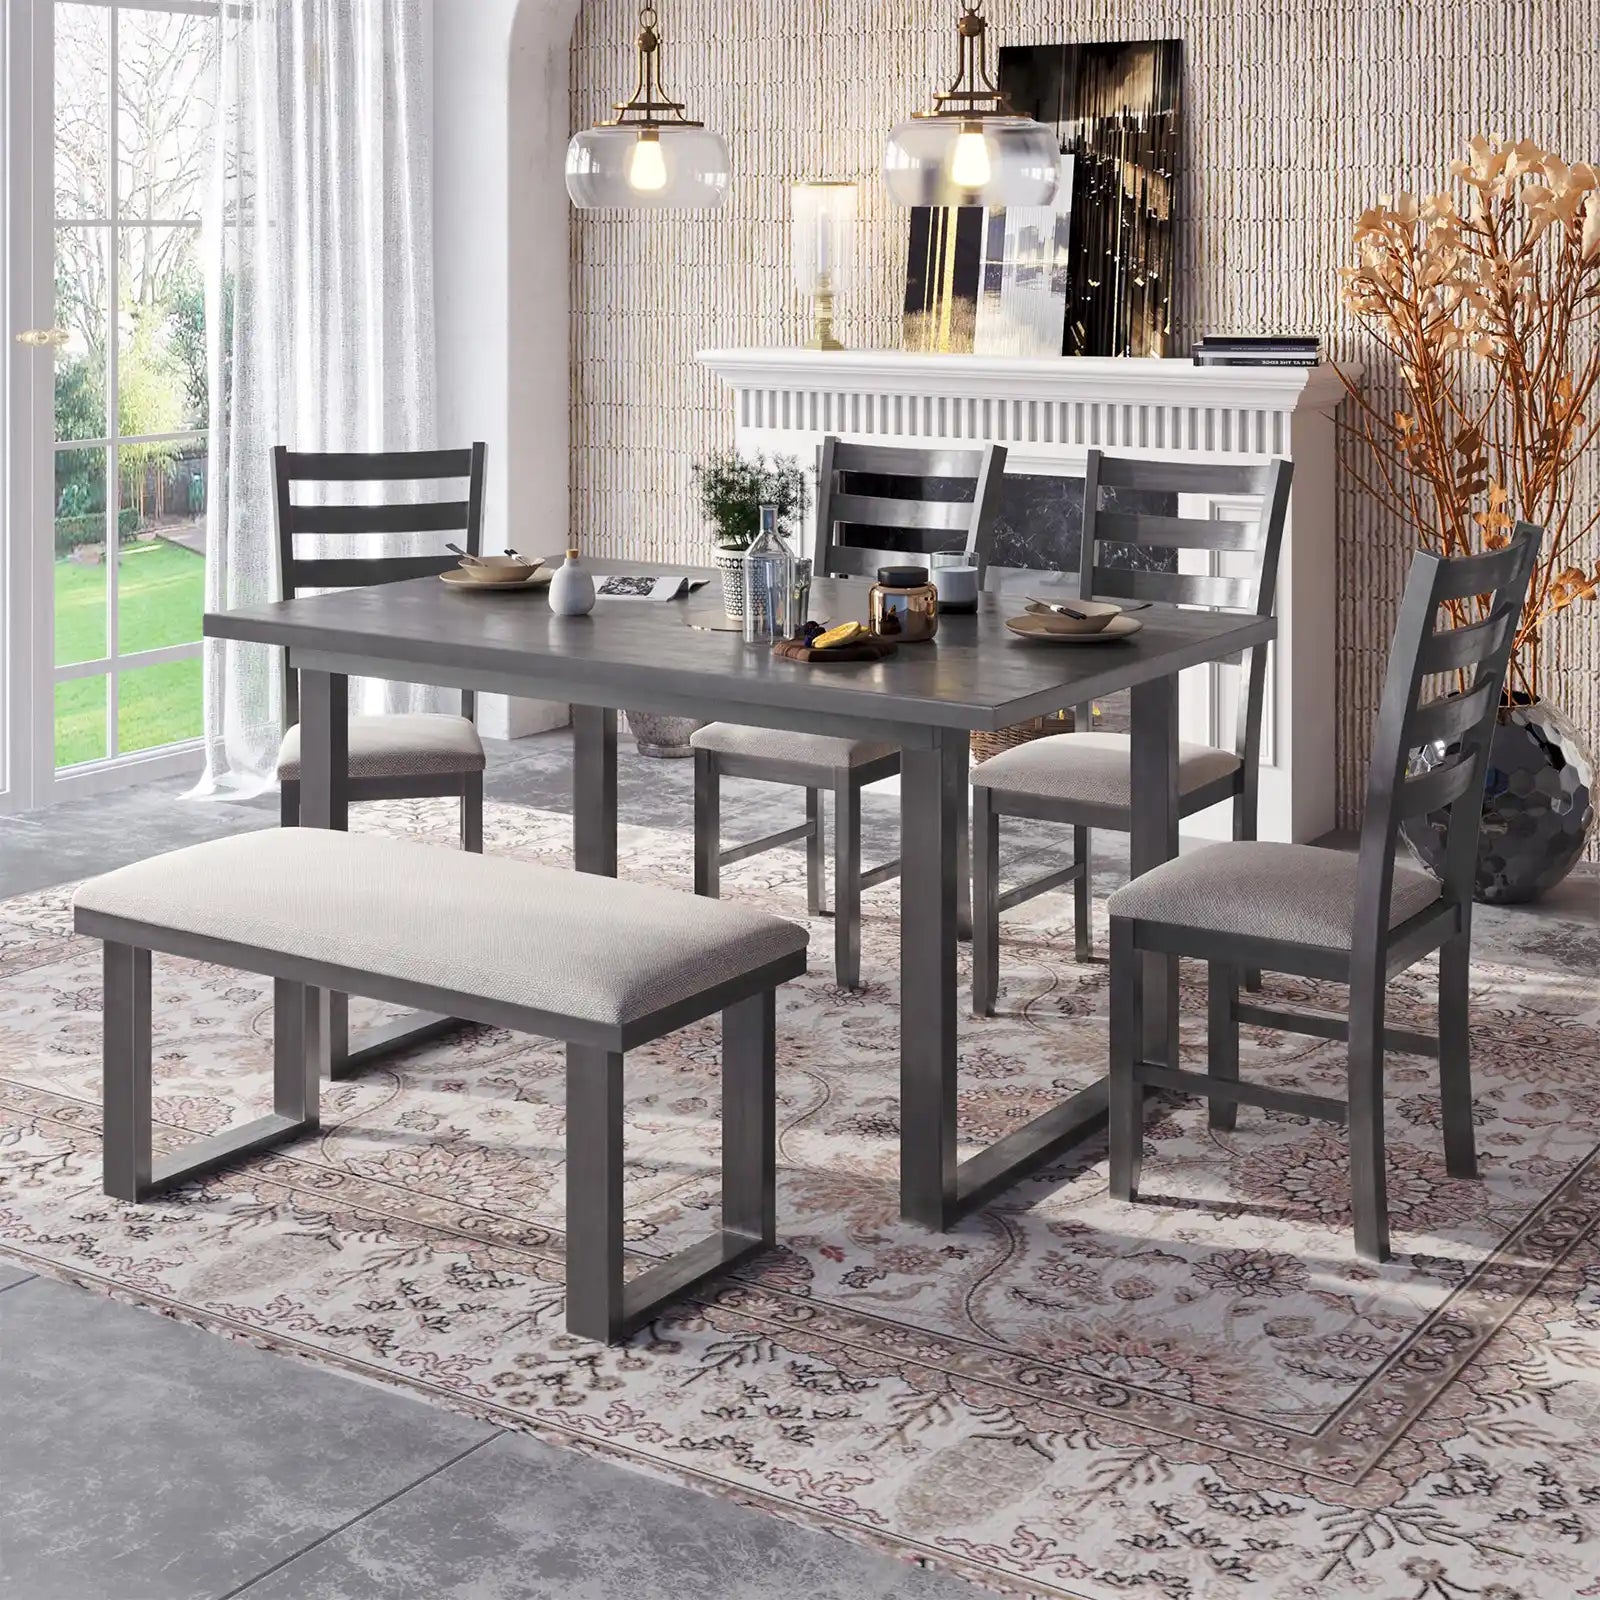 Rustic Wood Dining Table and 4 Chairs with 1 Bench with Cushion